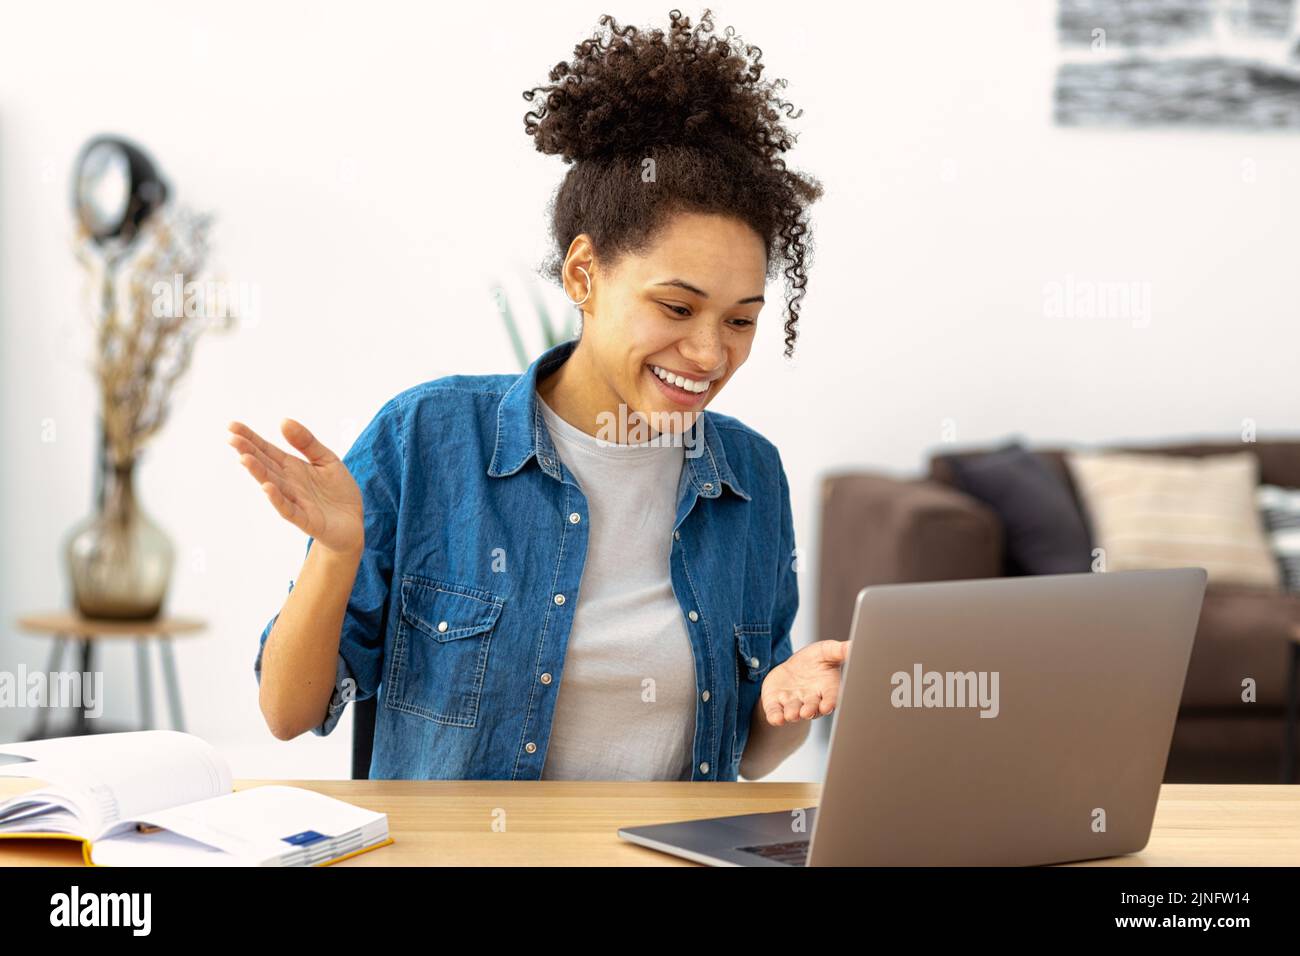 Happy woman young female student using laptop sitting in home having video call learning language Stock Photo